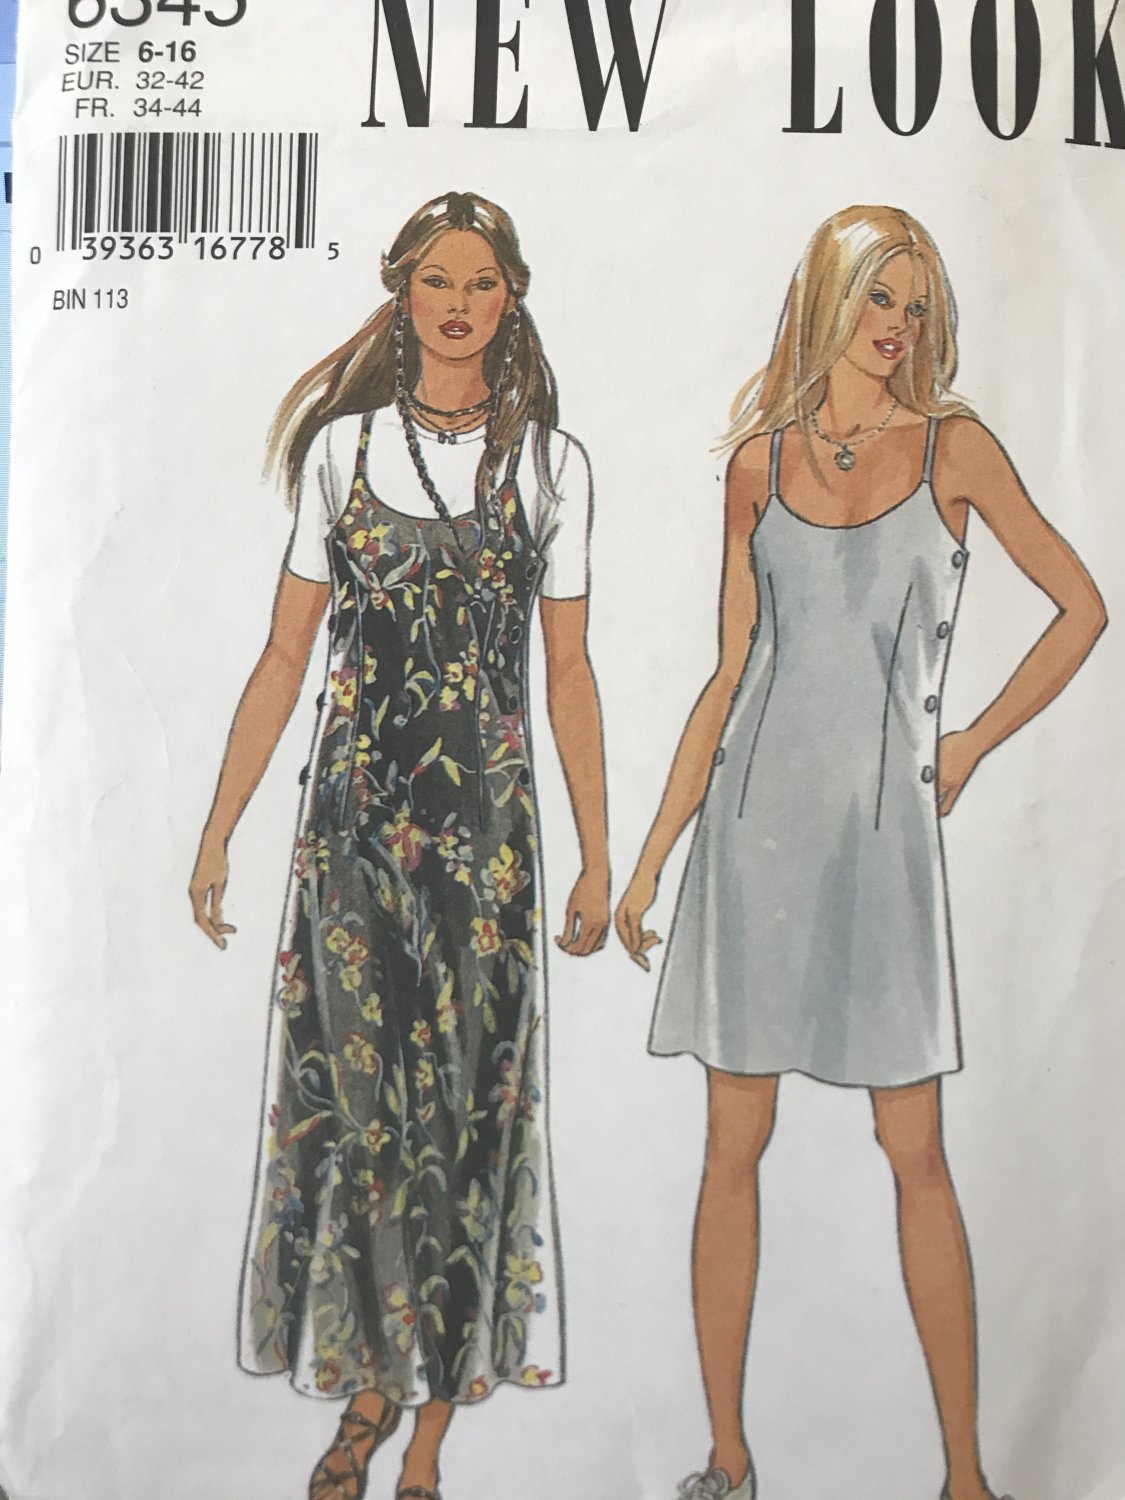 New Look 6345 Misses Dress with spaghetti straps sewing pattern size 6 - 16